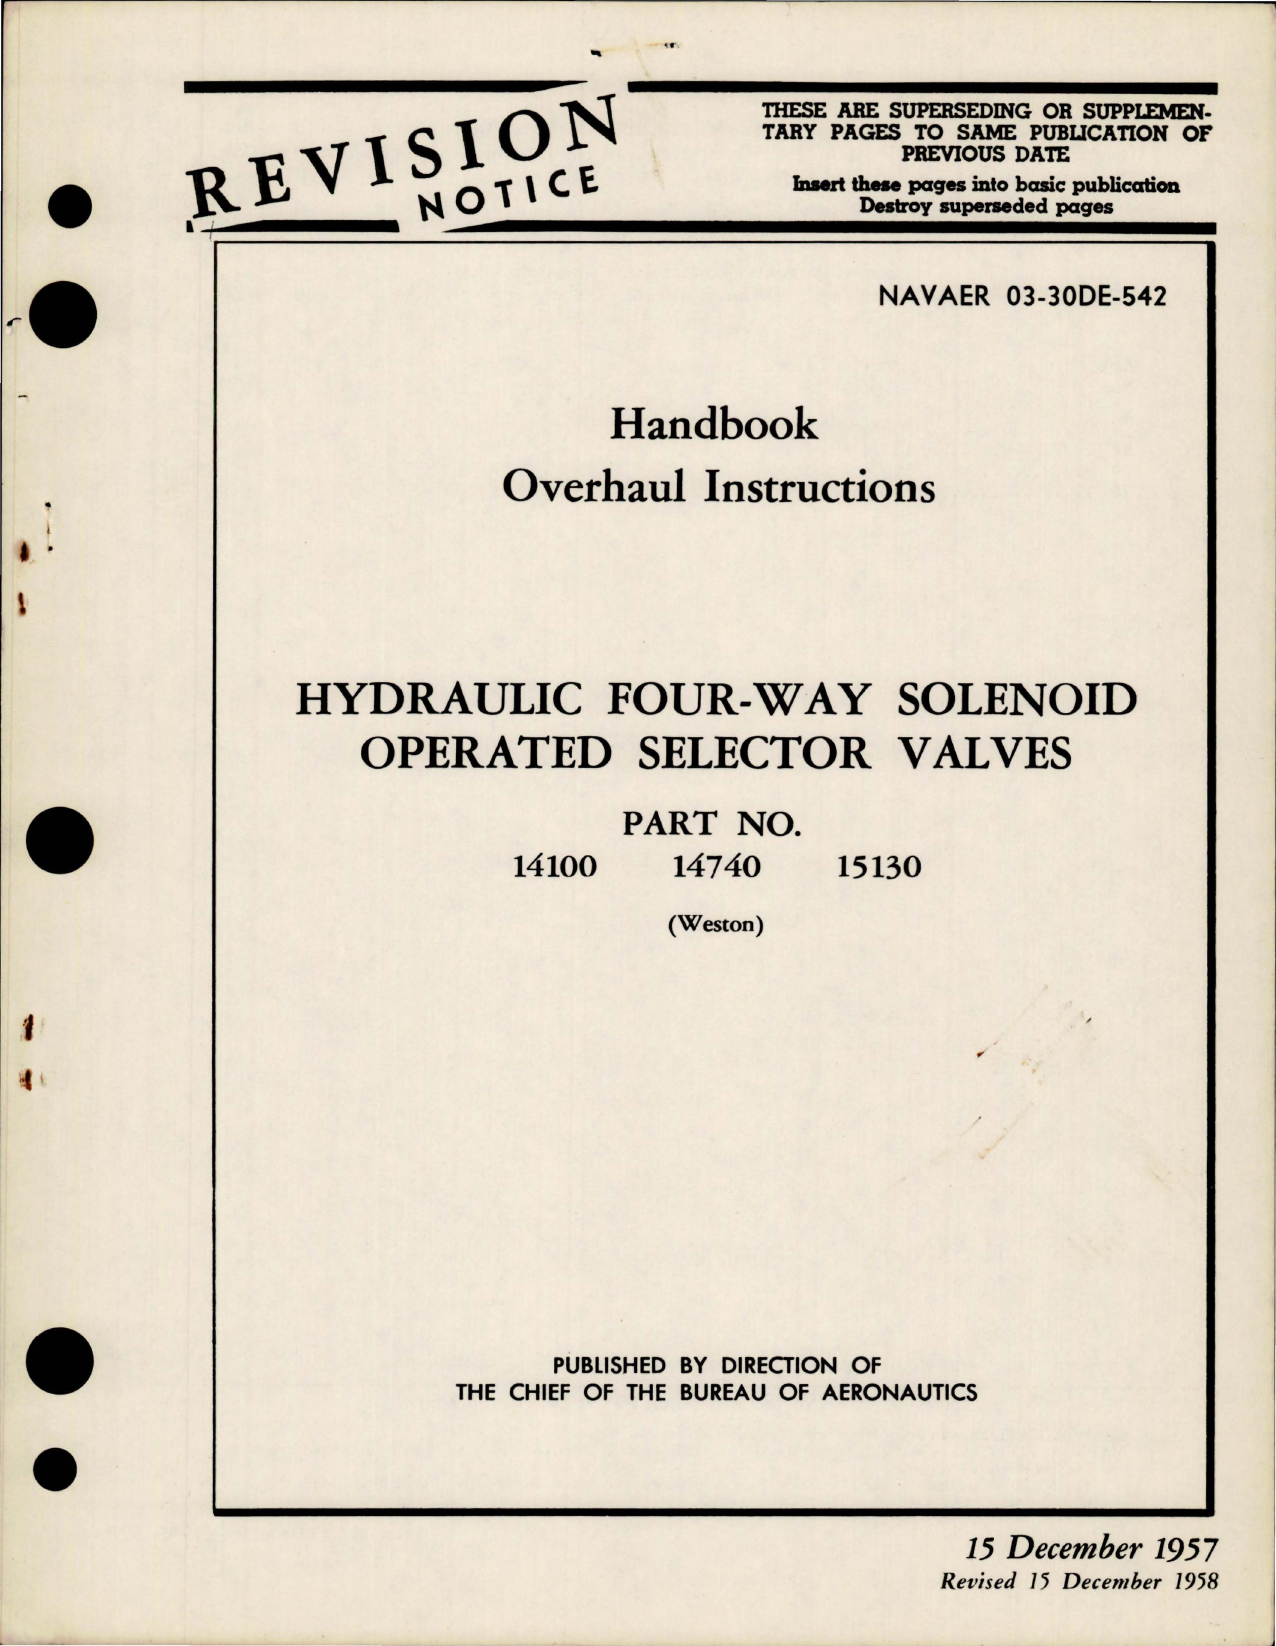 Sample page 1 from AirCorps Library document: Overhaul Instructions for Hydraulic Four-Way Solenoid Operated Selector Valves - Parts 14100, 14740 and 15130